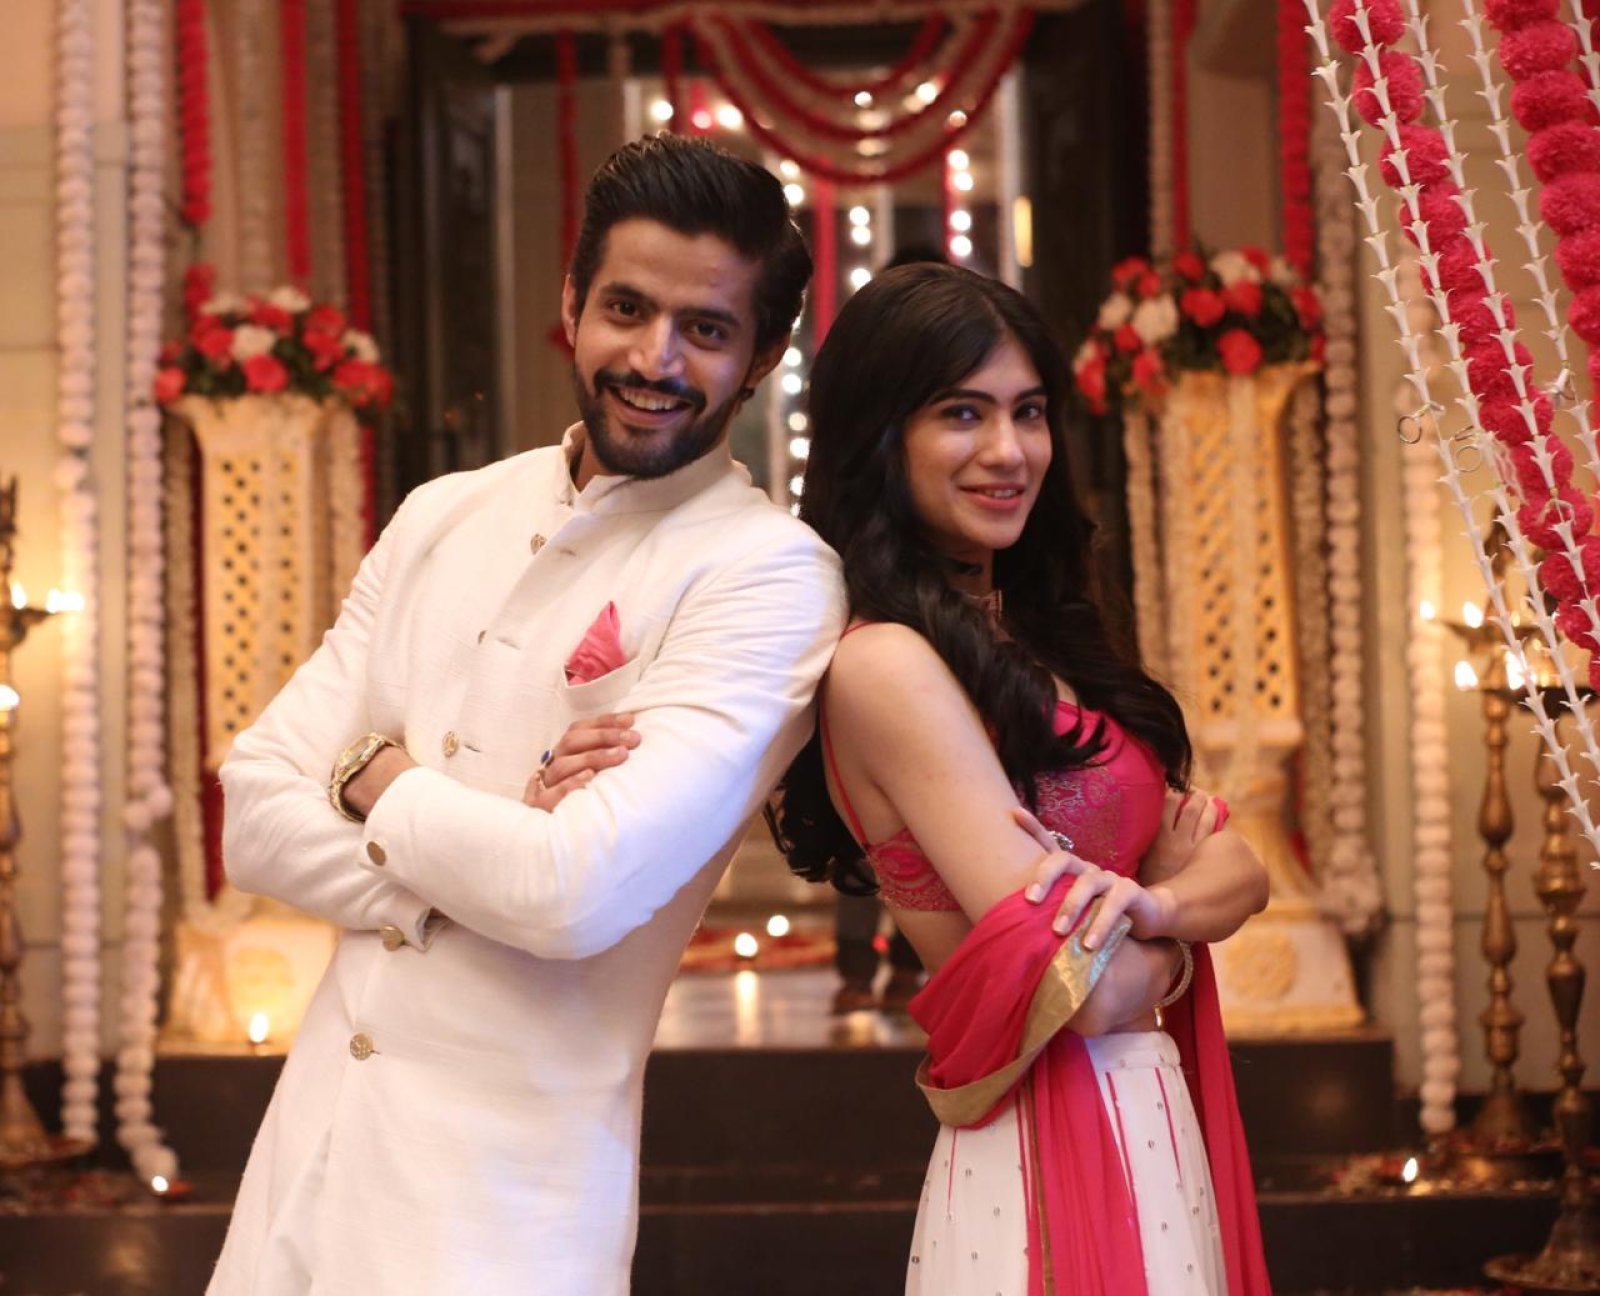 Sorab Bedi hints at the upcoming romantic twist in Tv Show Chand Jalne Laga, says 'Raunak and Farwari's love story is going to be a pivotal element in the show'